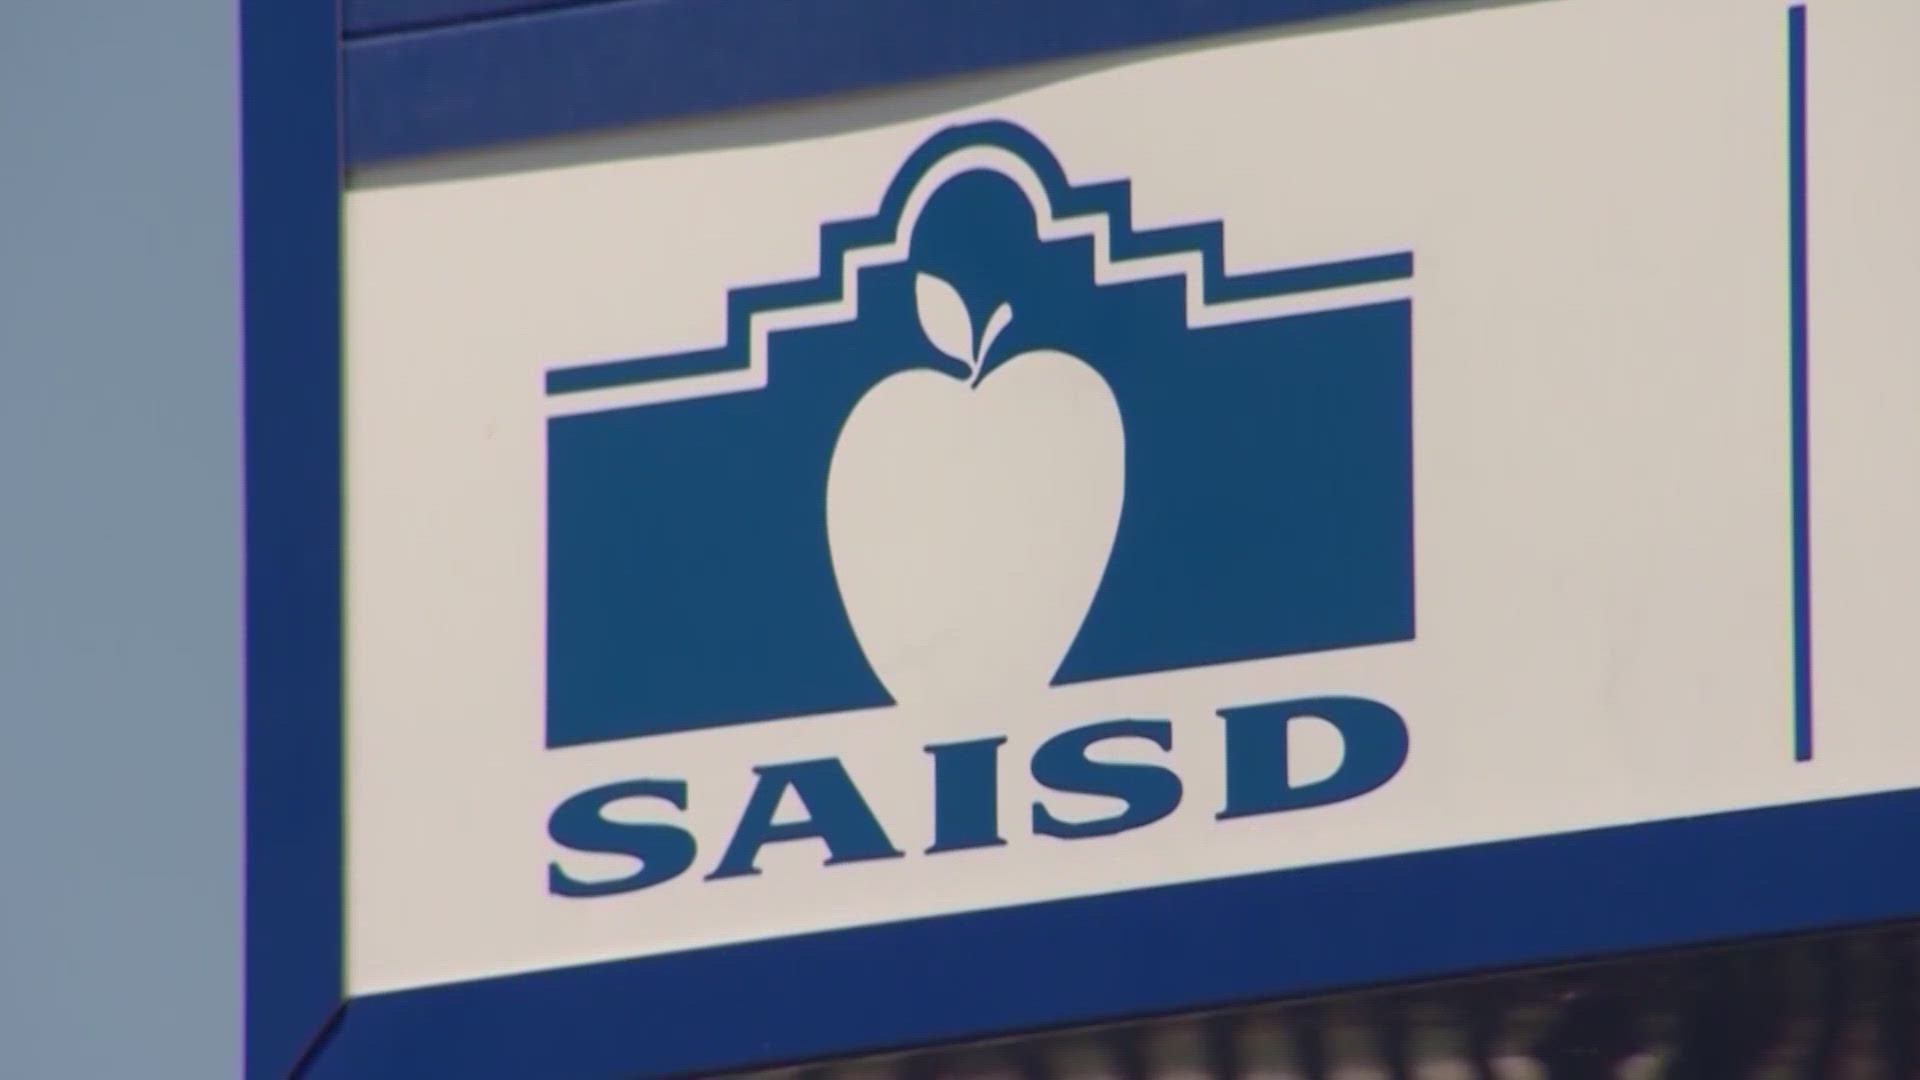 SAISD's police force currently employs 58 officers, but more than 90 schools make up the district.